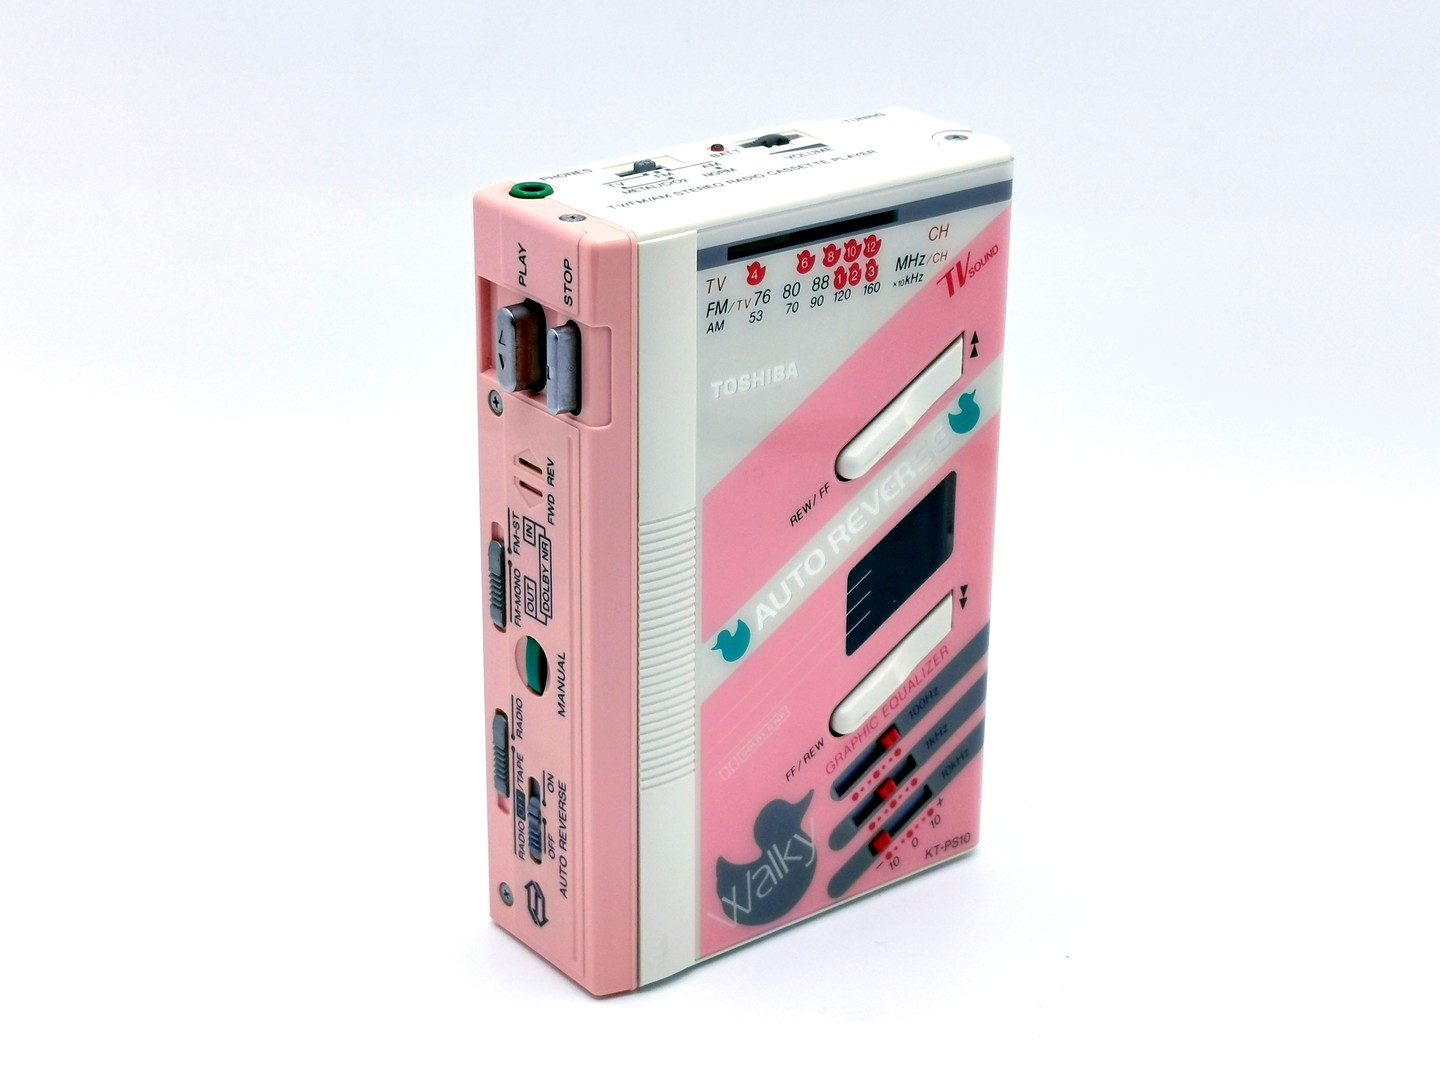 Toshiba-KT-PS10-Pink-Front-top-side-angled-ig-boxedwalkman